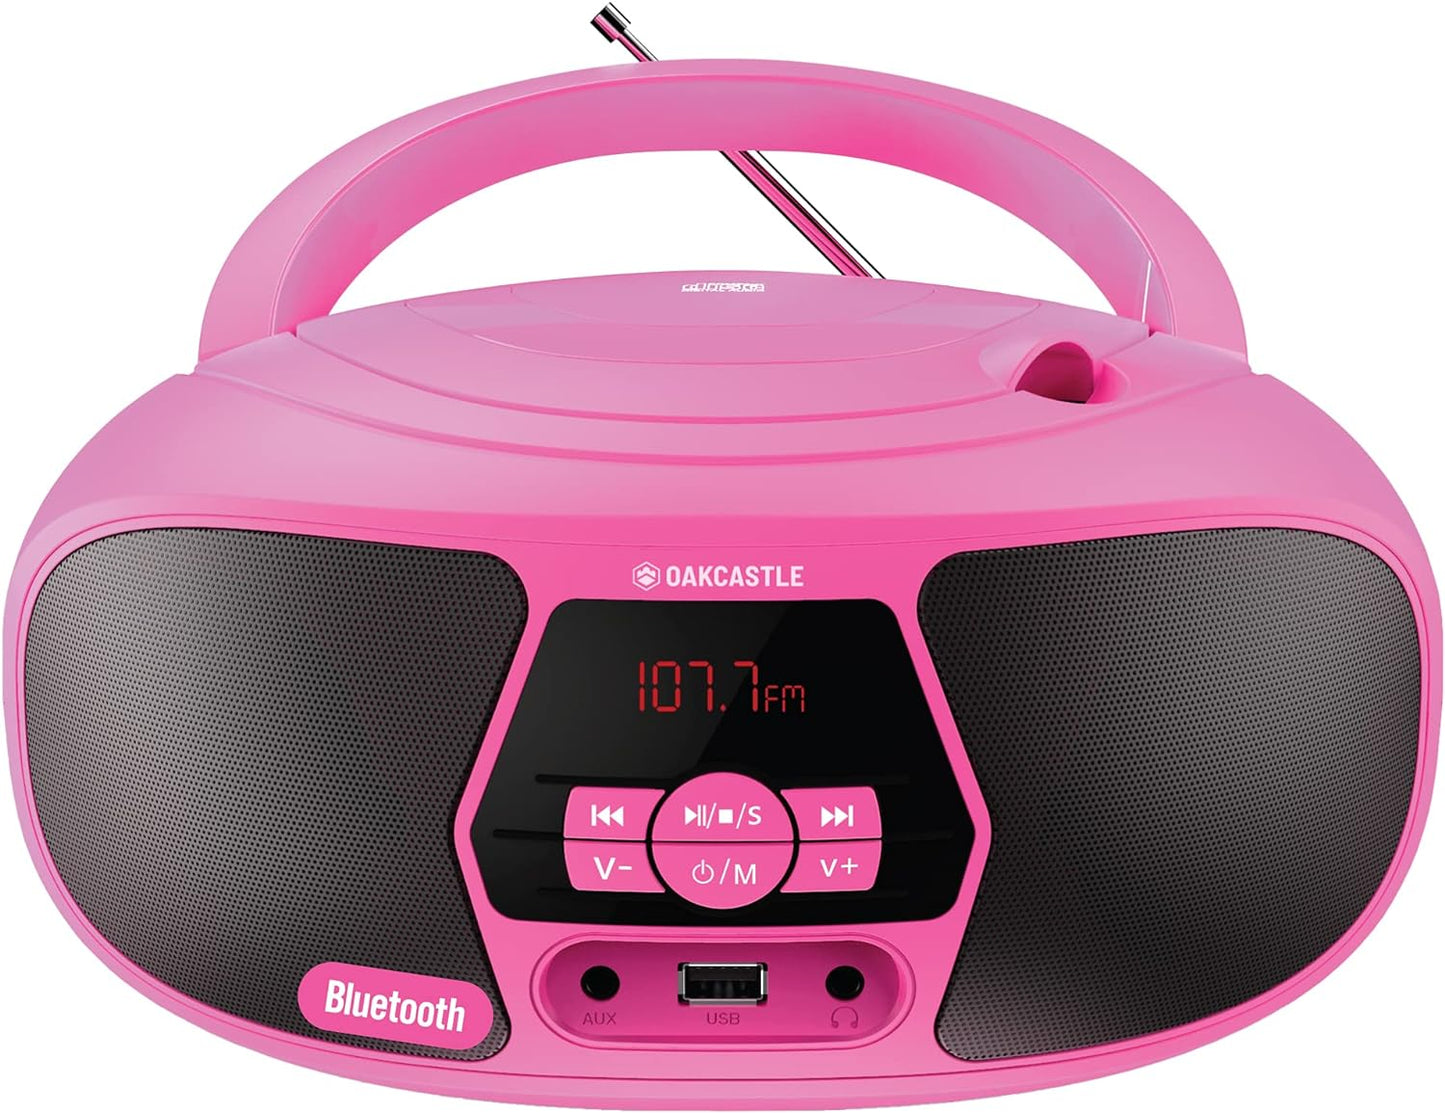 BX200 Portable CD Player Boombox | Bluetooth, FM Radio, USB & Aux Playback | 2.0 Stereo Sound | 15hr Battery Playtime | Headphone Jack, Simple Controls, LED Display, Oakcastle